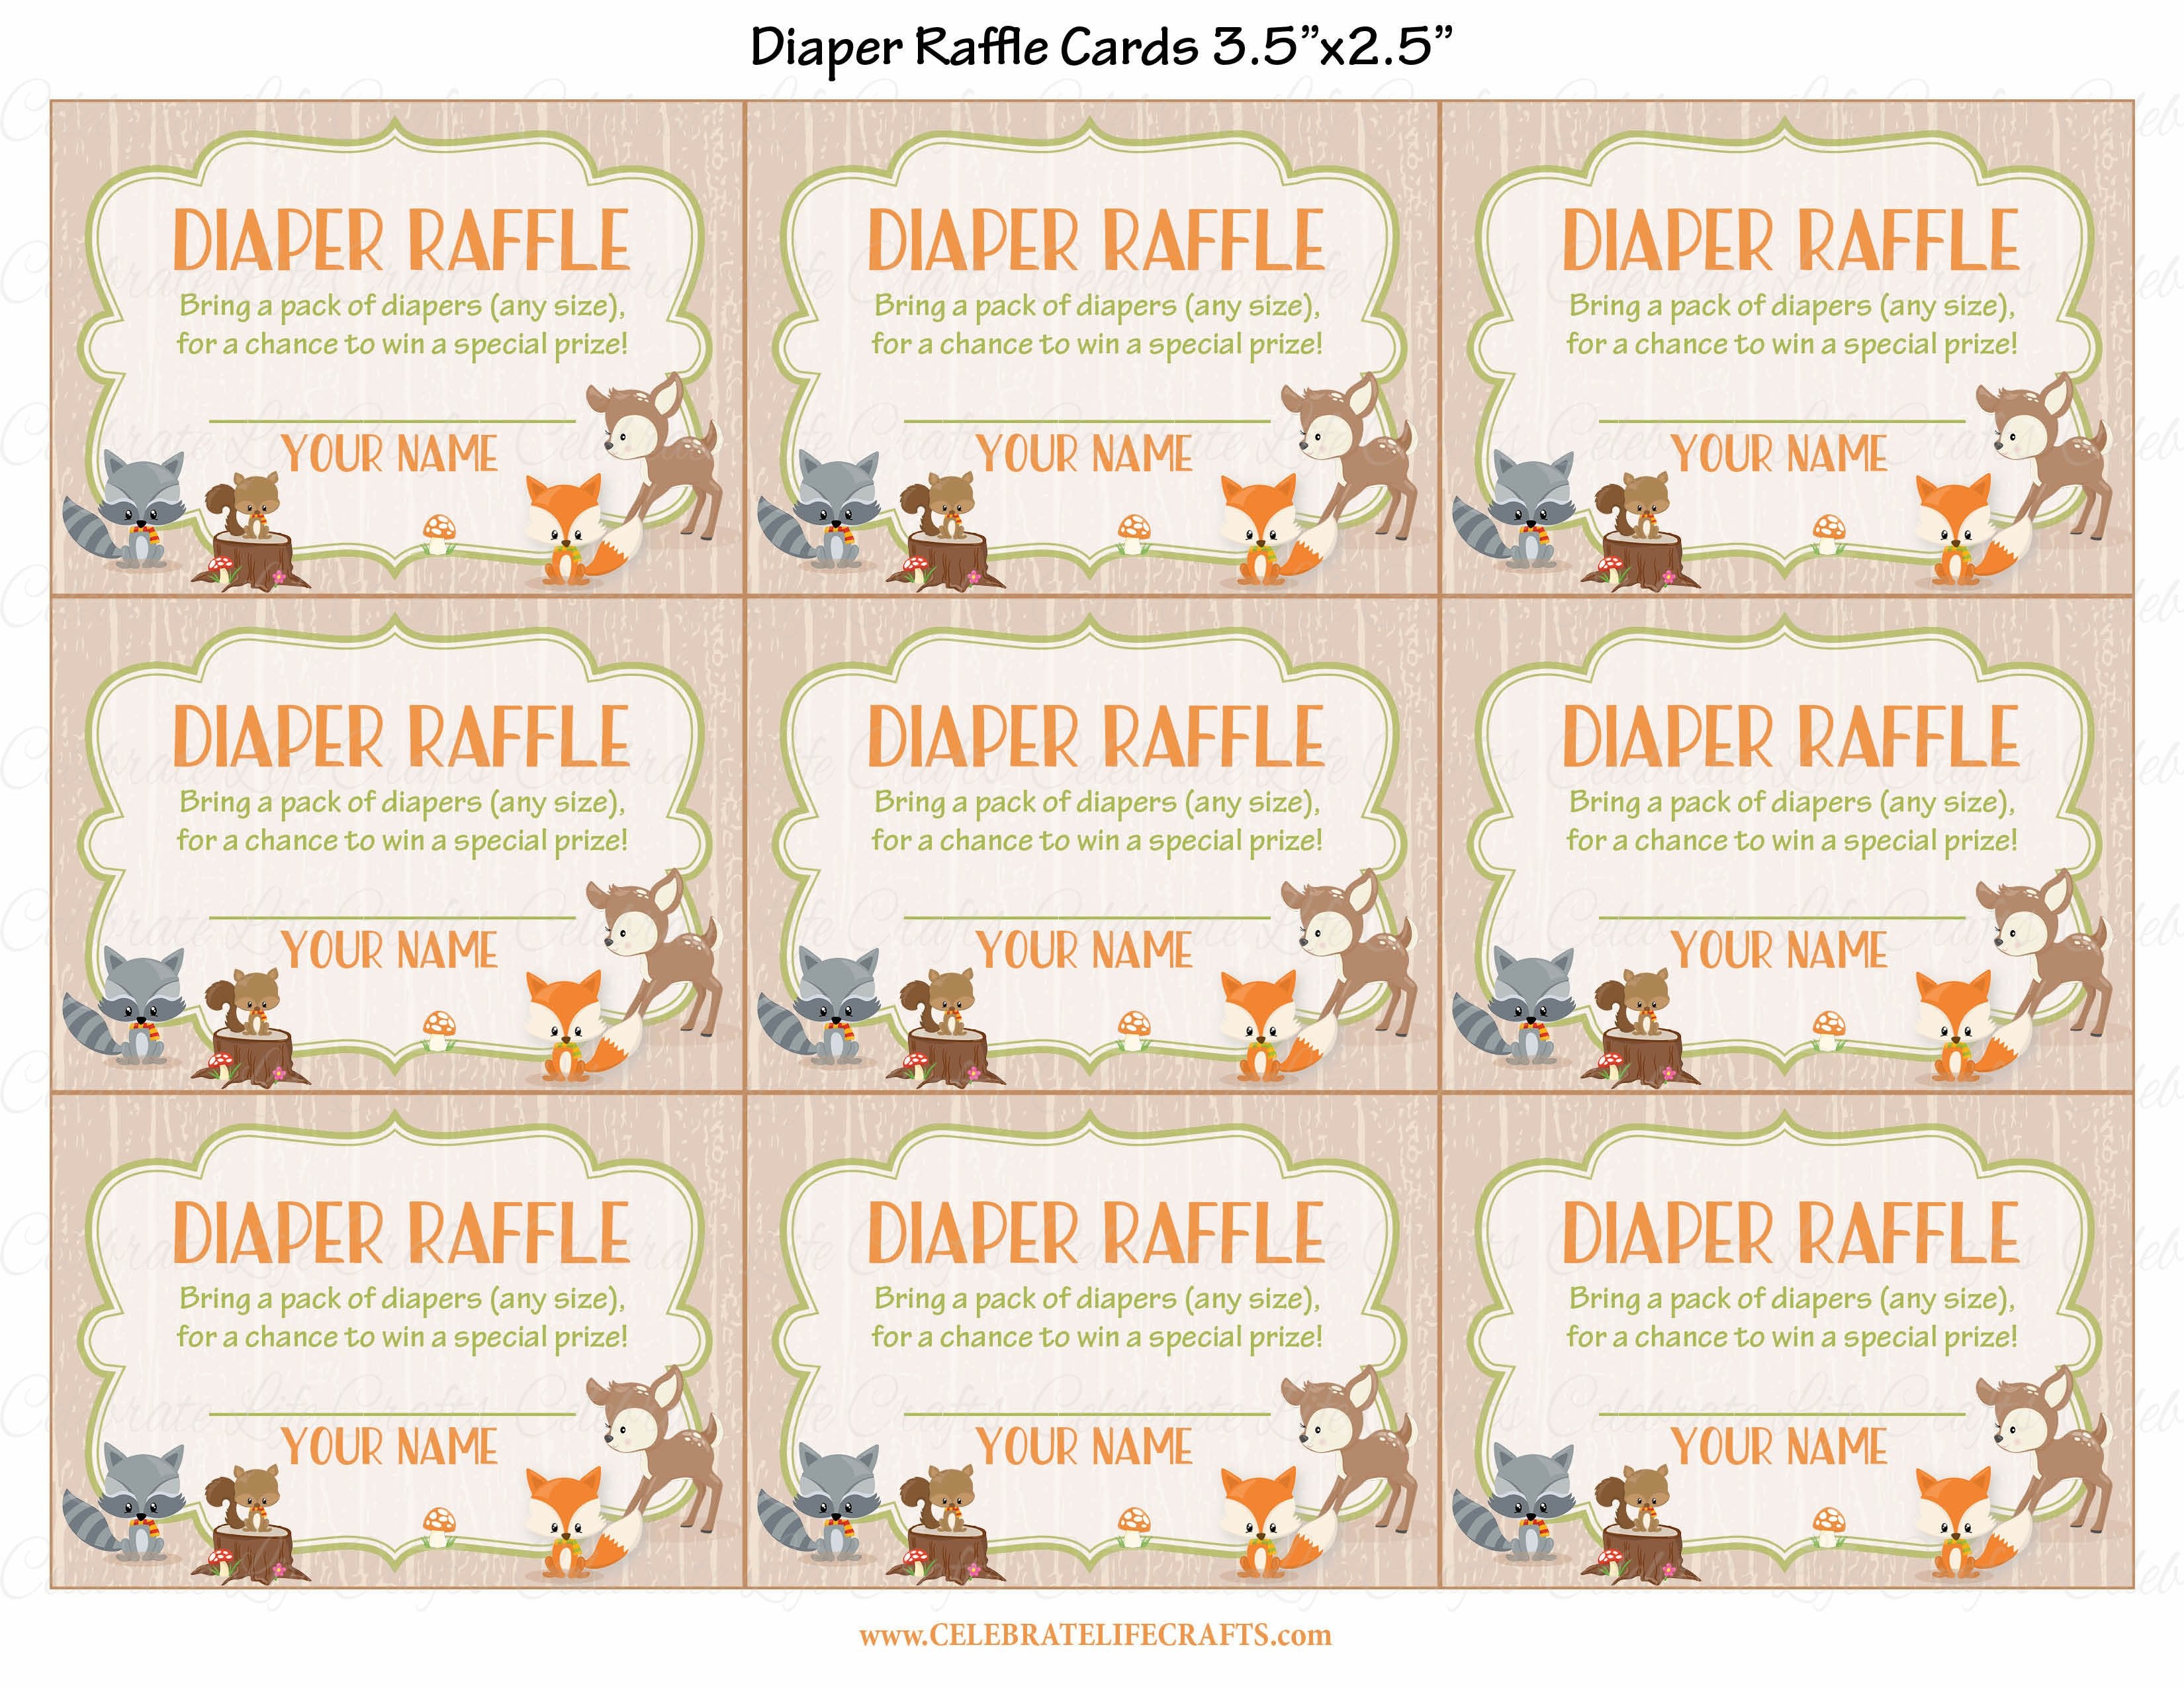 diaper-raffle-ticket-bring-diapers-to-win-a-prize-baby-shower-raffle